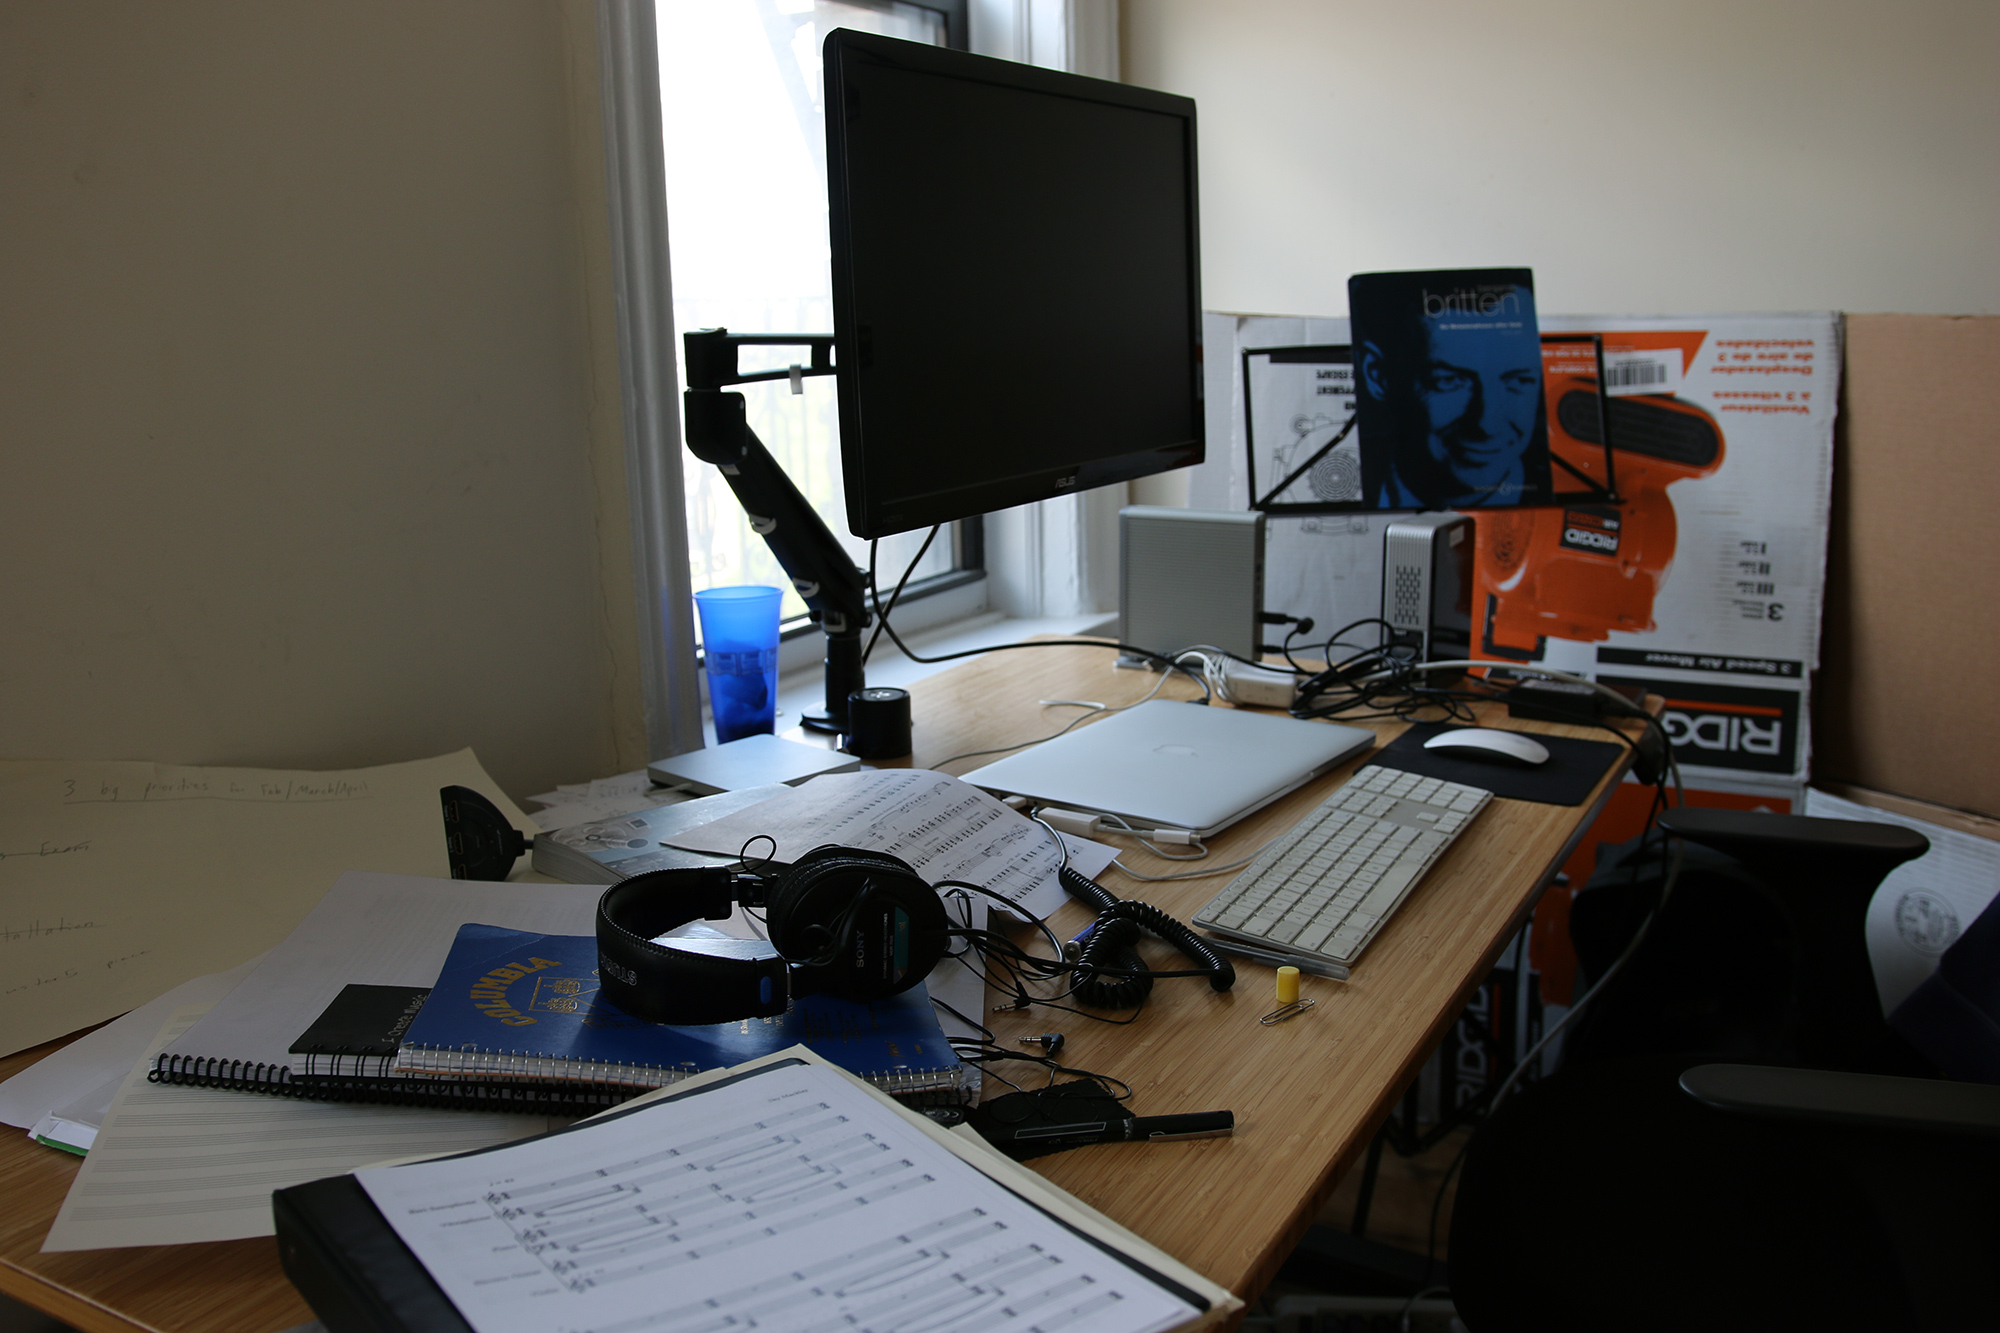 A work table with a closed laptop, an additional computer keyboard and large-scale monitor, headphones, and printed musical scores.